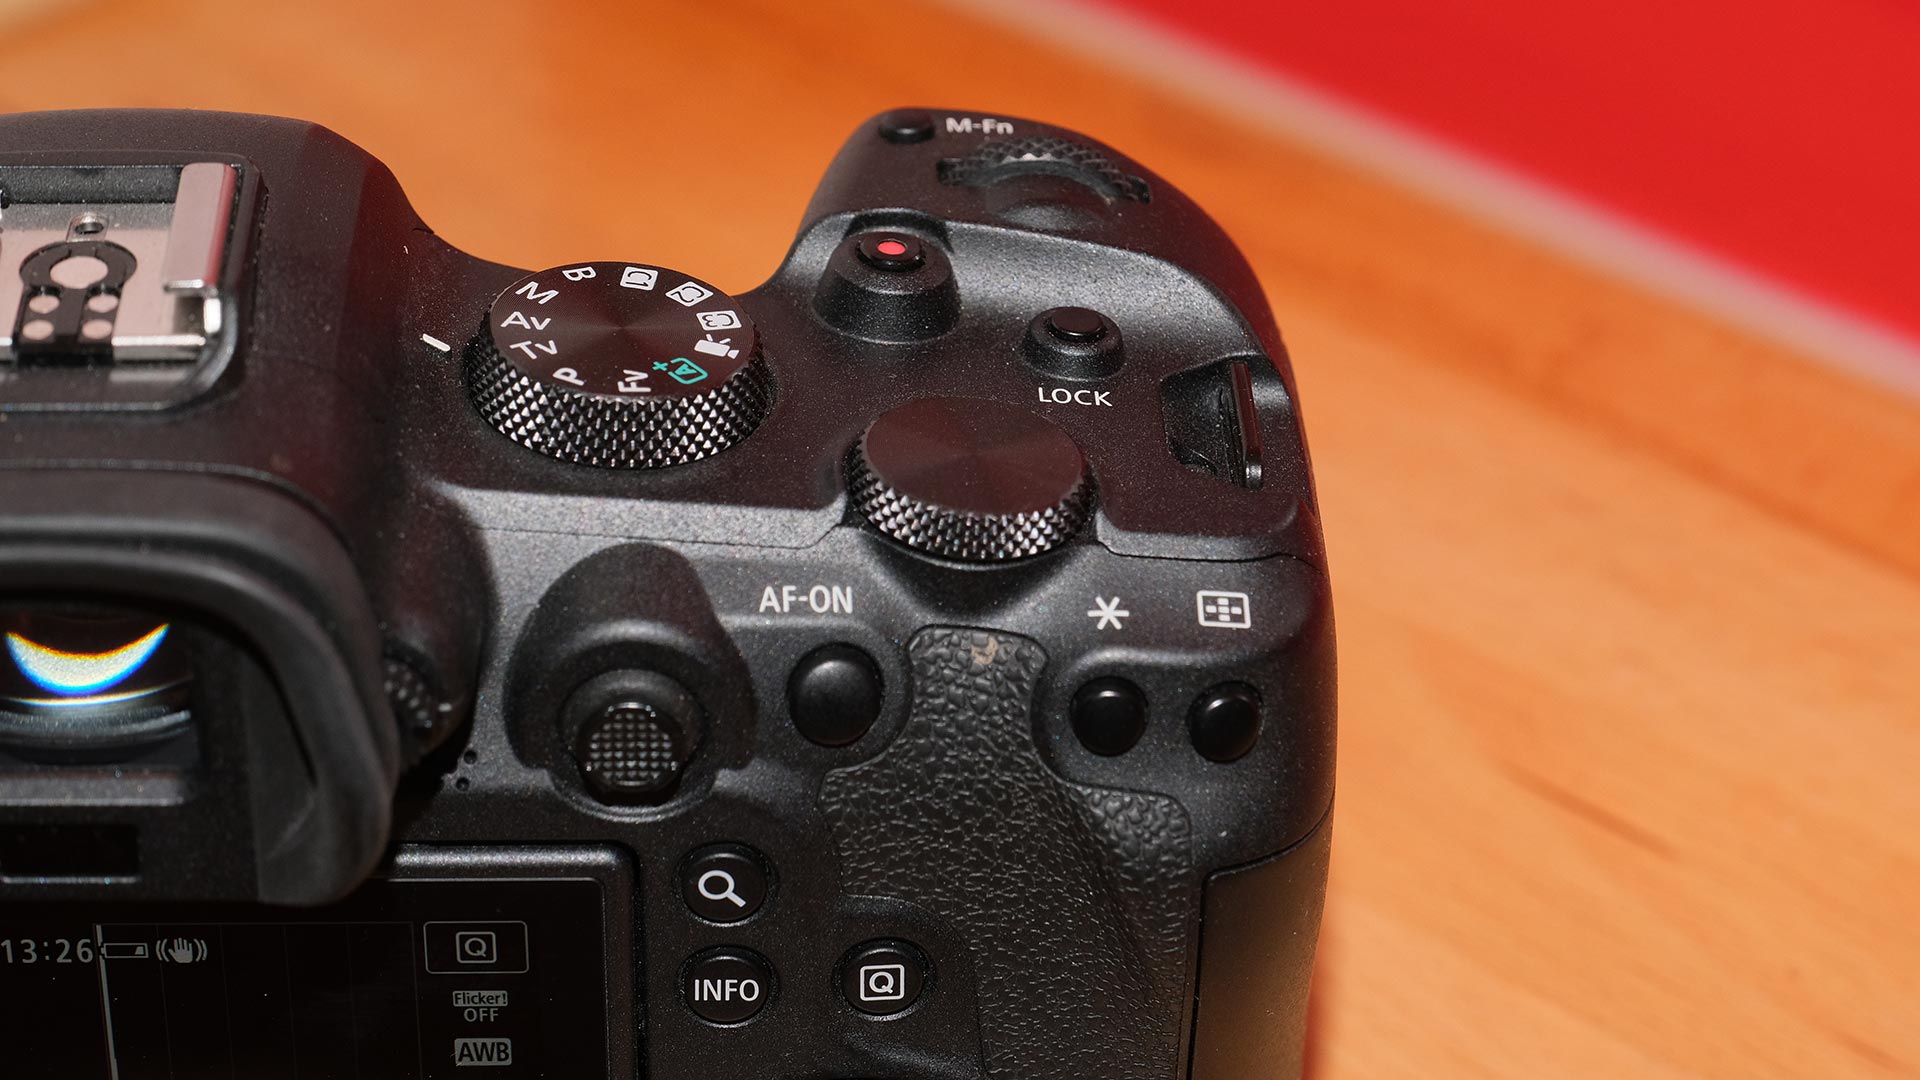 The Canon EOS R6 full-frame mirrorless camera. This shot shows the controls on the rear right